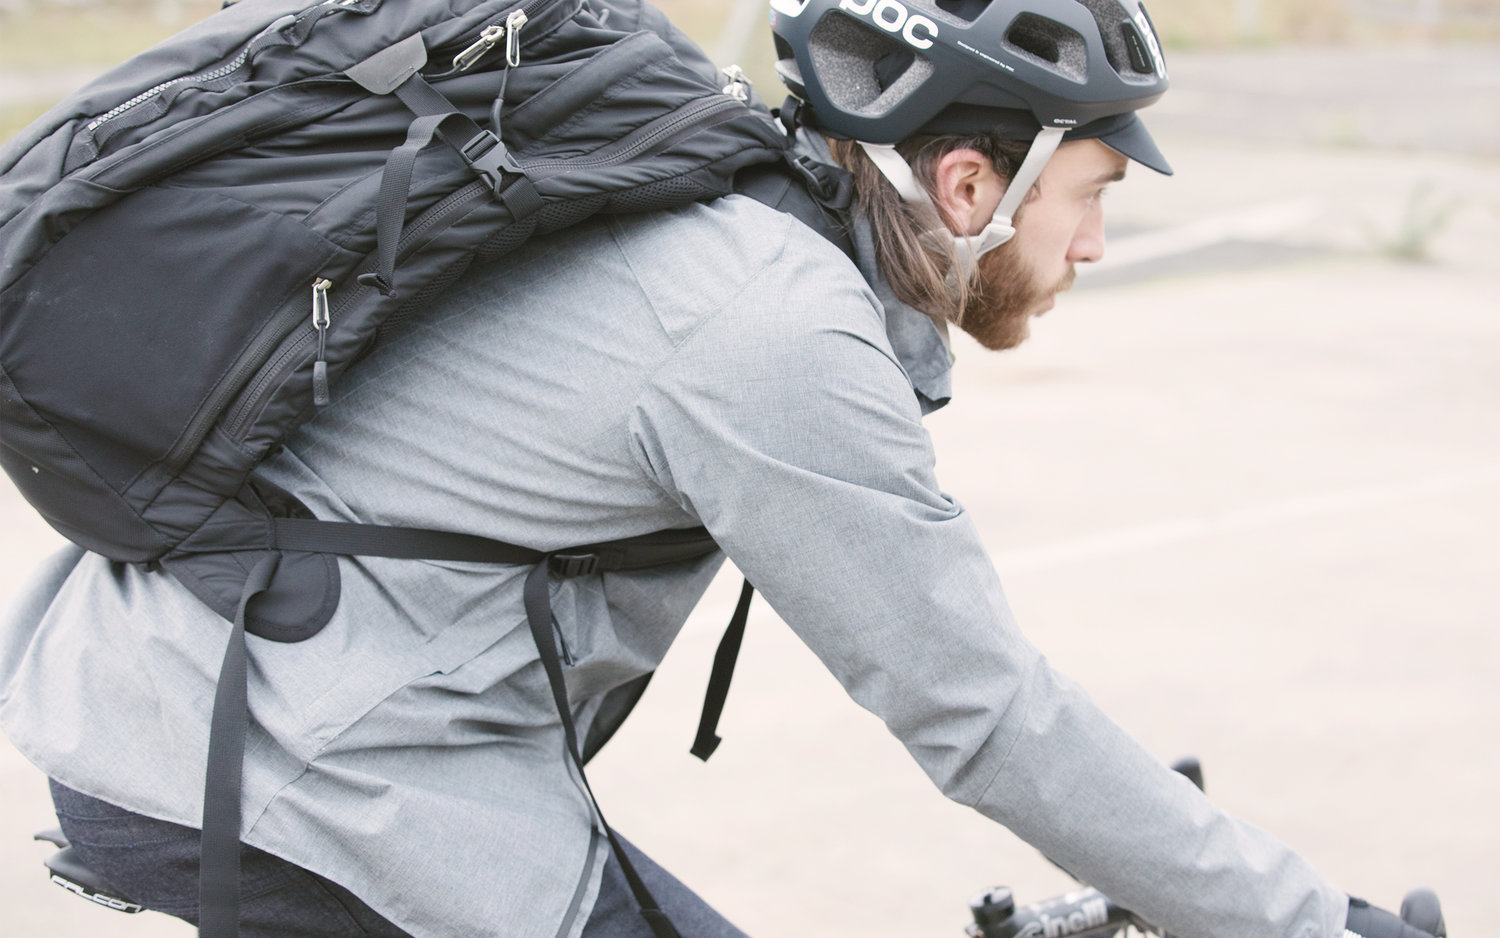 Resolute Bay LS2 Reflective Cycling Jacket stands out in the best way possible